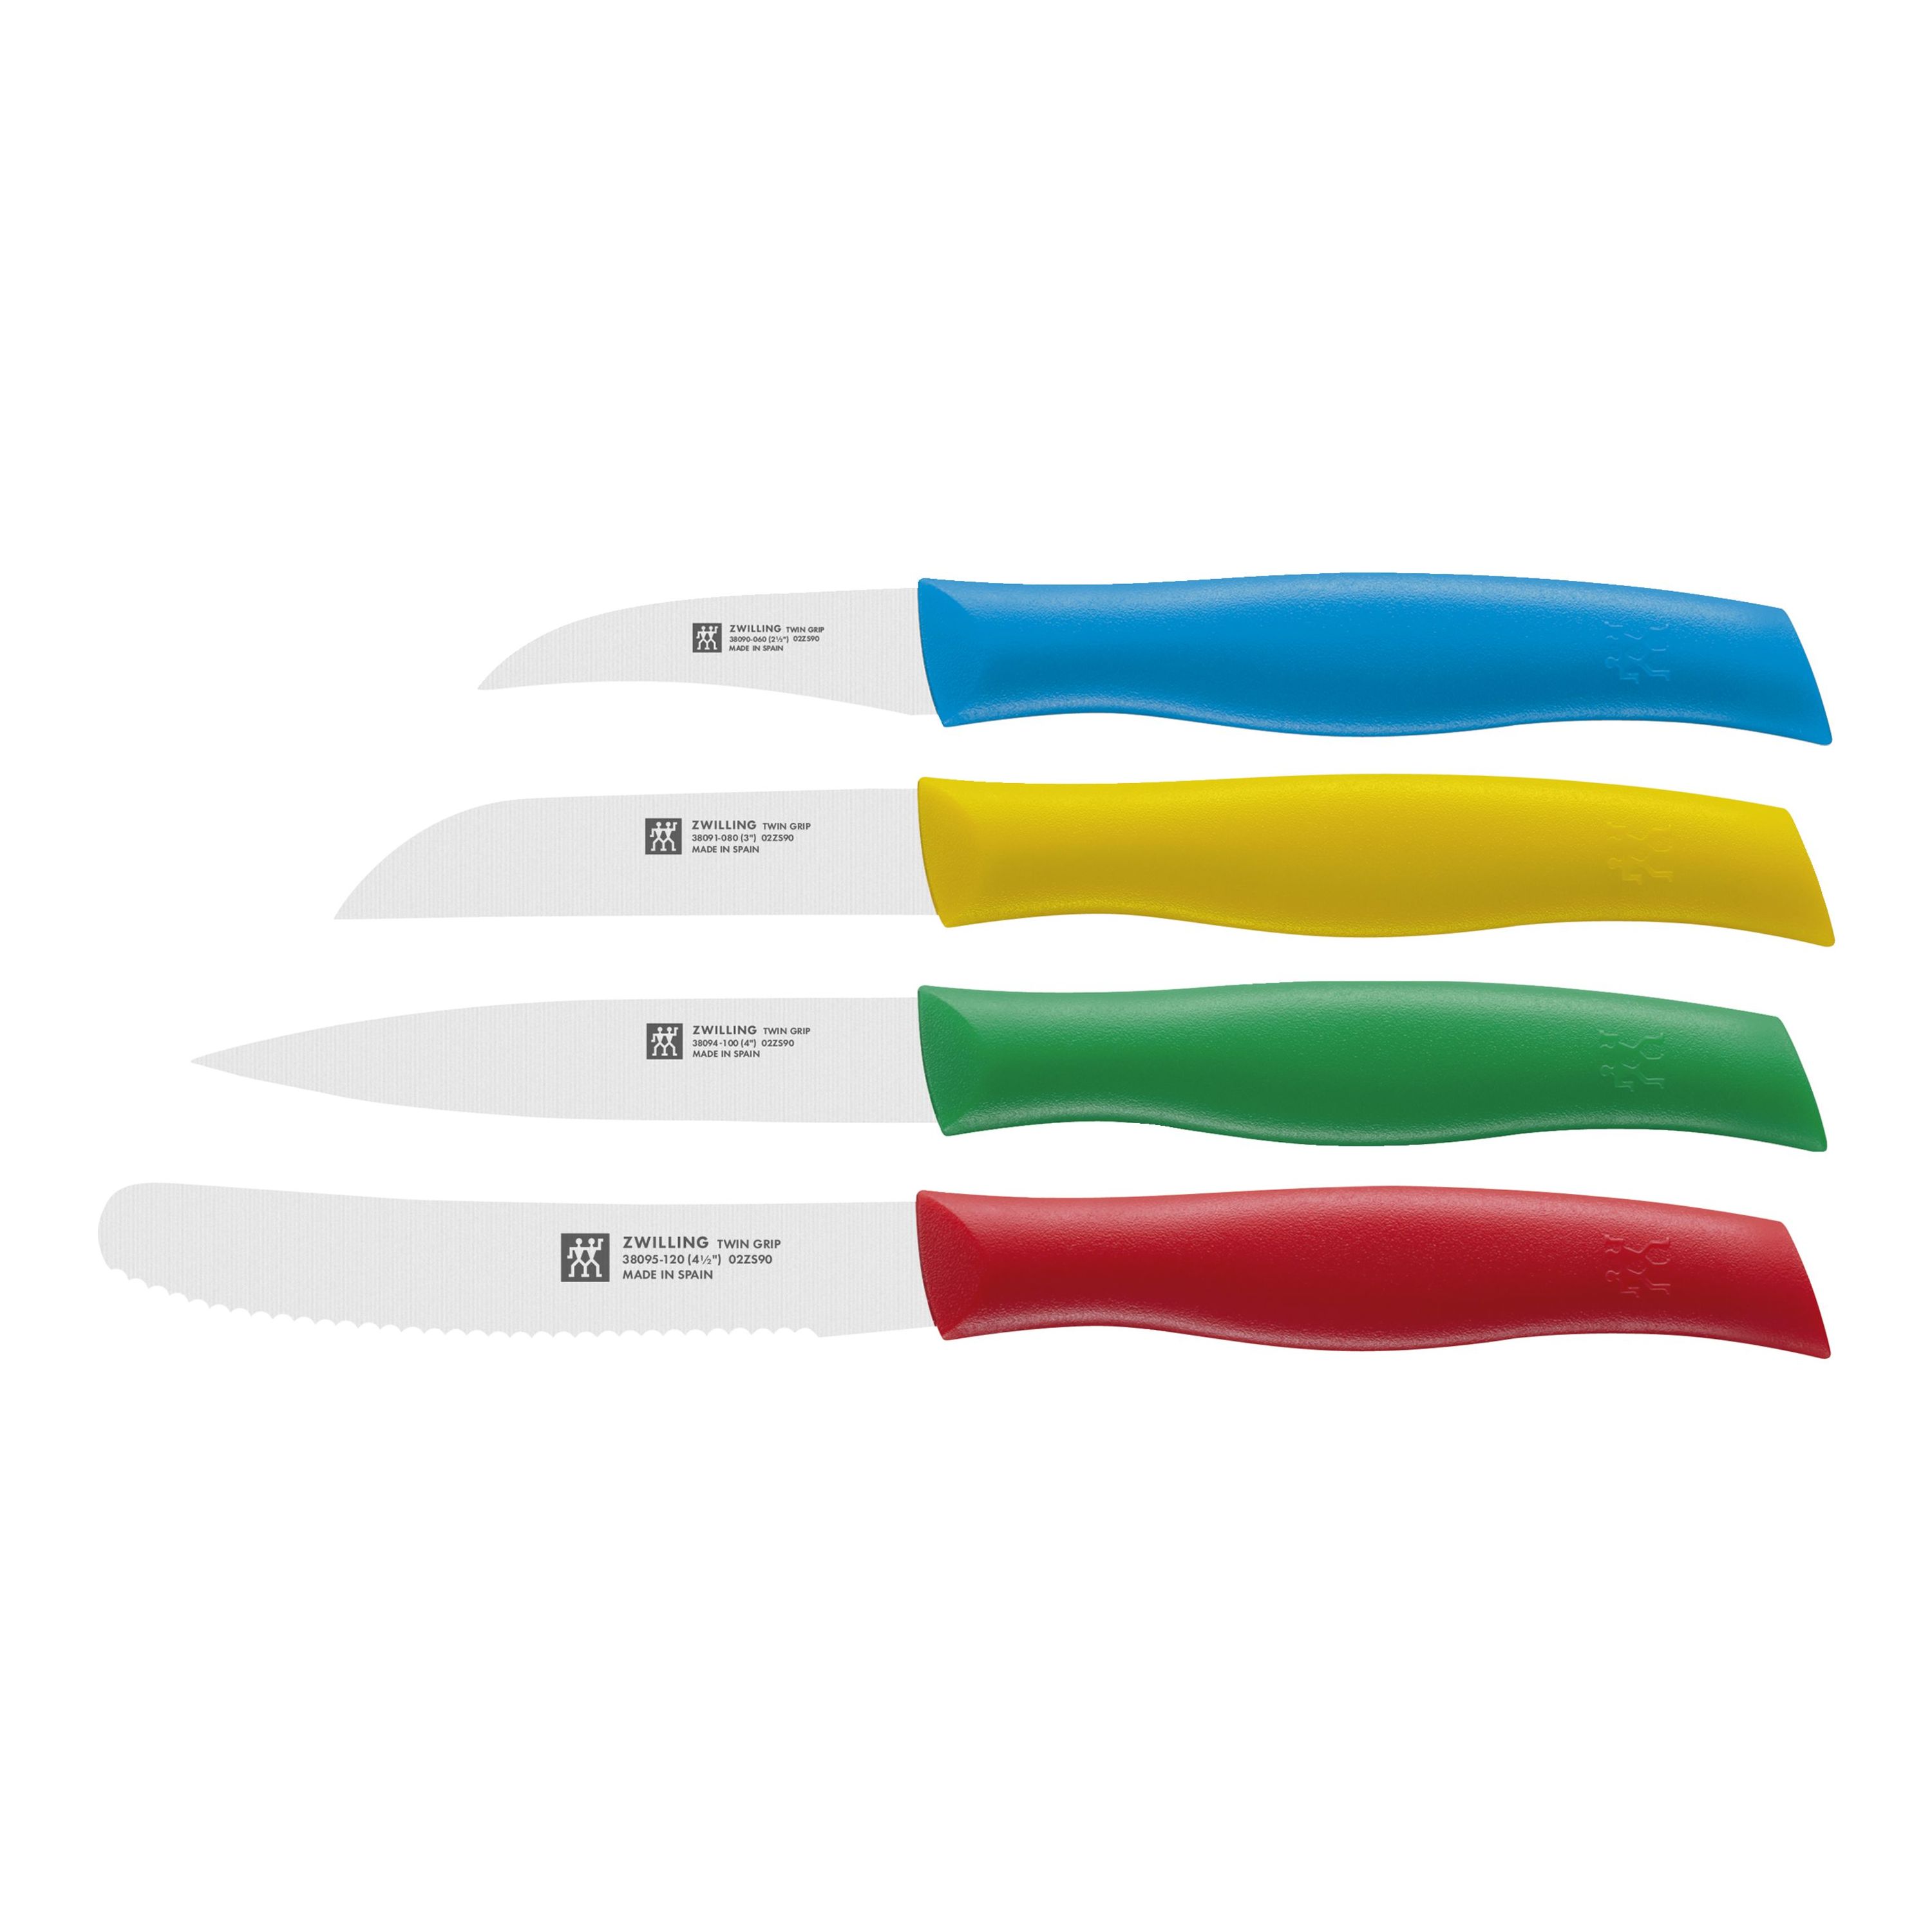 Henckels 3-pc Plastic Cutting Board Set - Multi Color, 3-pc - Foods Co.